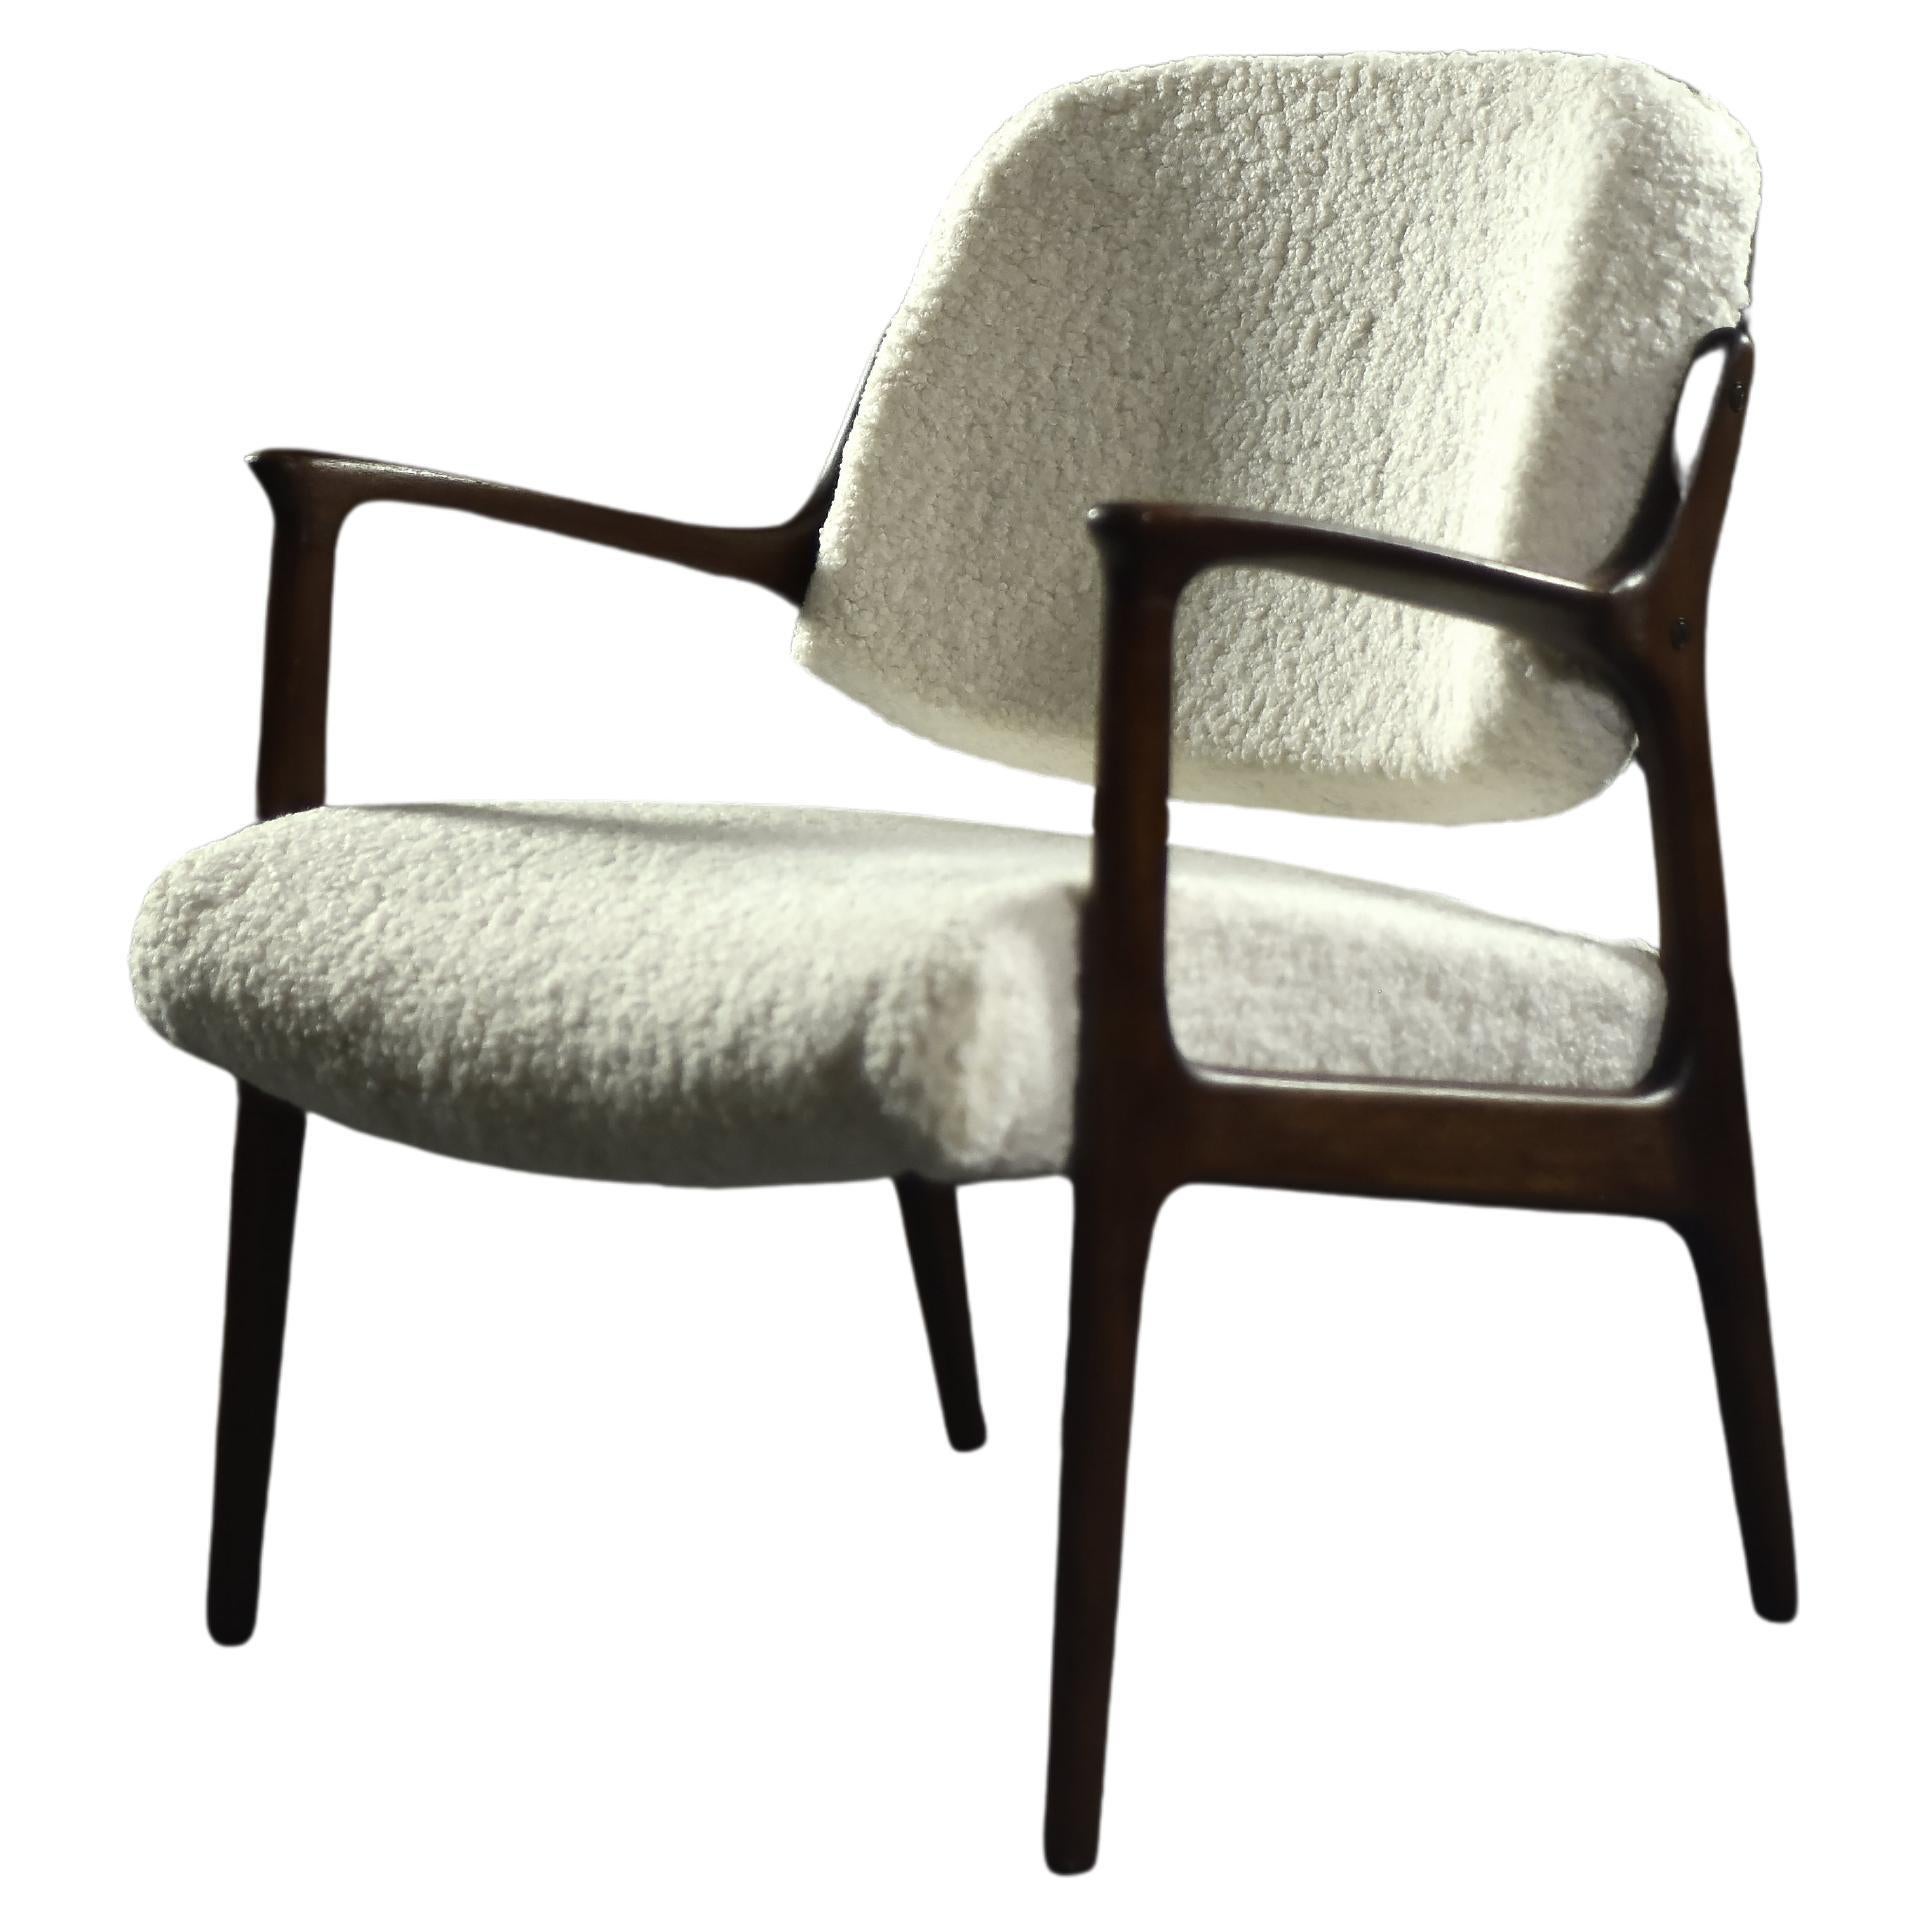 Mid-Century Scandinavian Modern Teak White Lounge Chair Domus by Inge Andersson For Sale